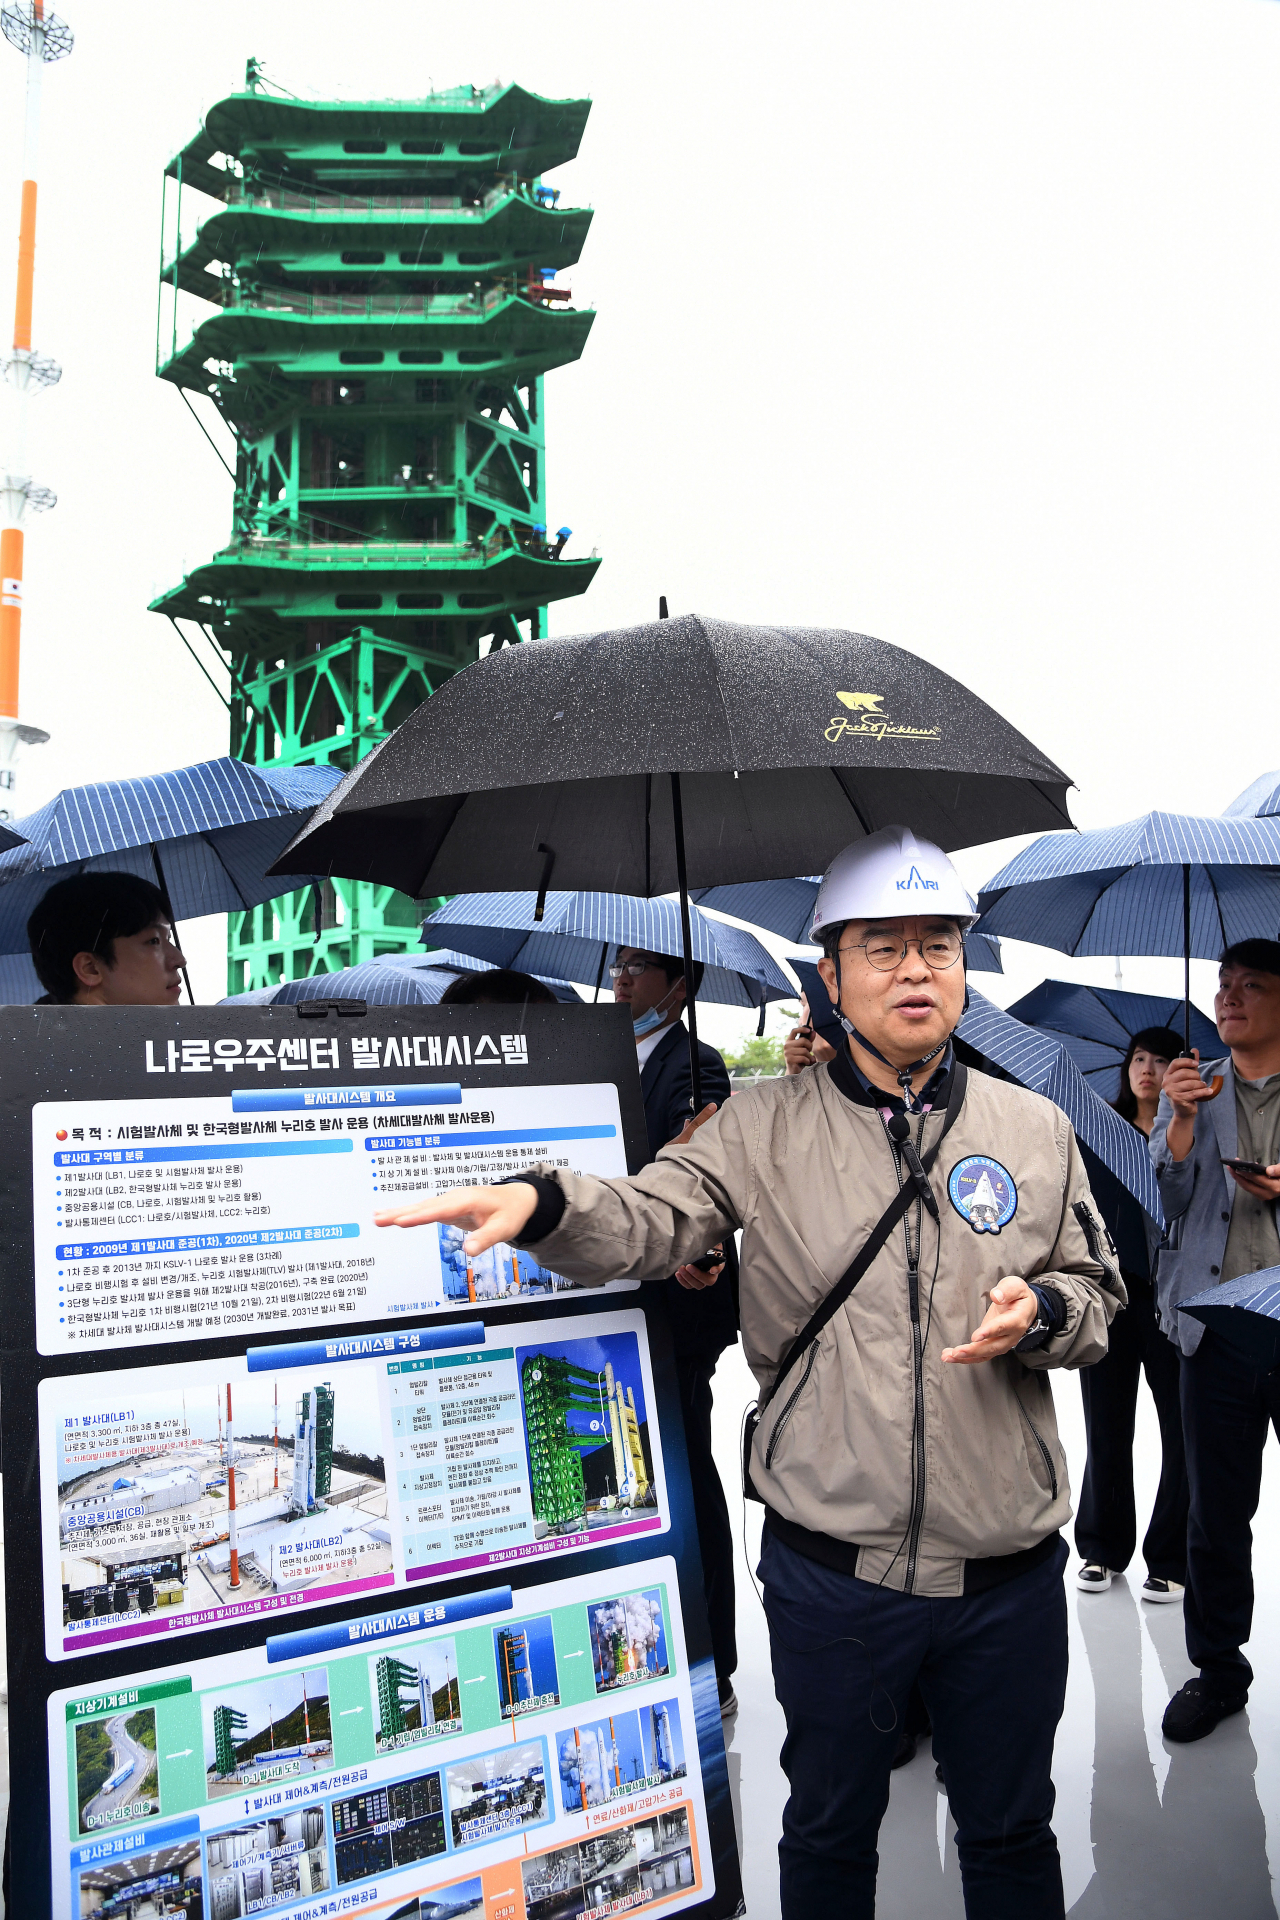 Kang Sun-il, a researcher at the Korea Aerospace Research Institute, introduces the launch pad that will be used for the Nuri rocket's launch later this month to reporters at the Naro Space Center in Goheung, South Jeolla Province, on May 3. (Korea Aerospace Research Institute)